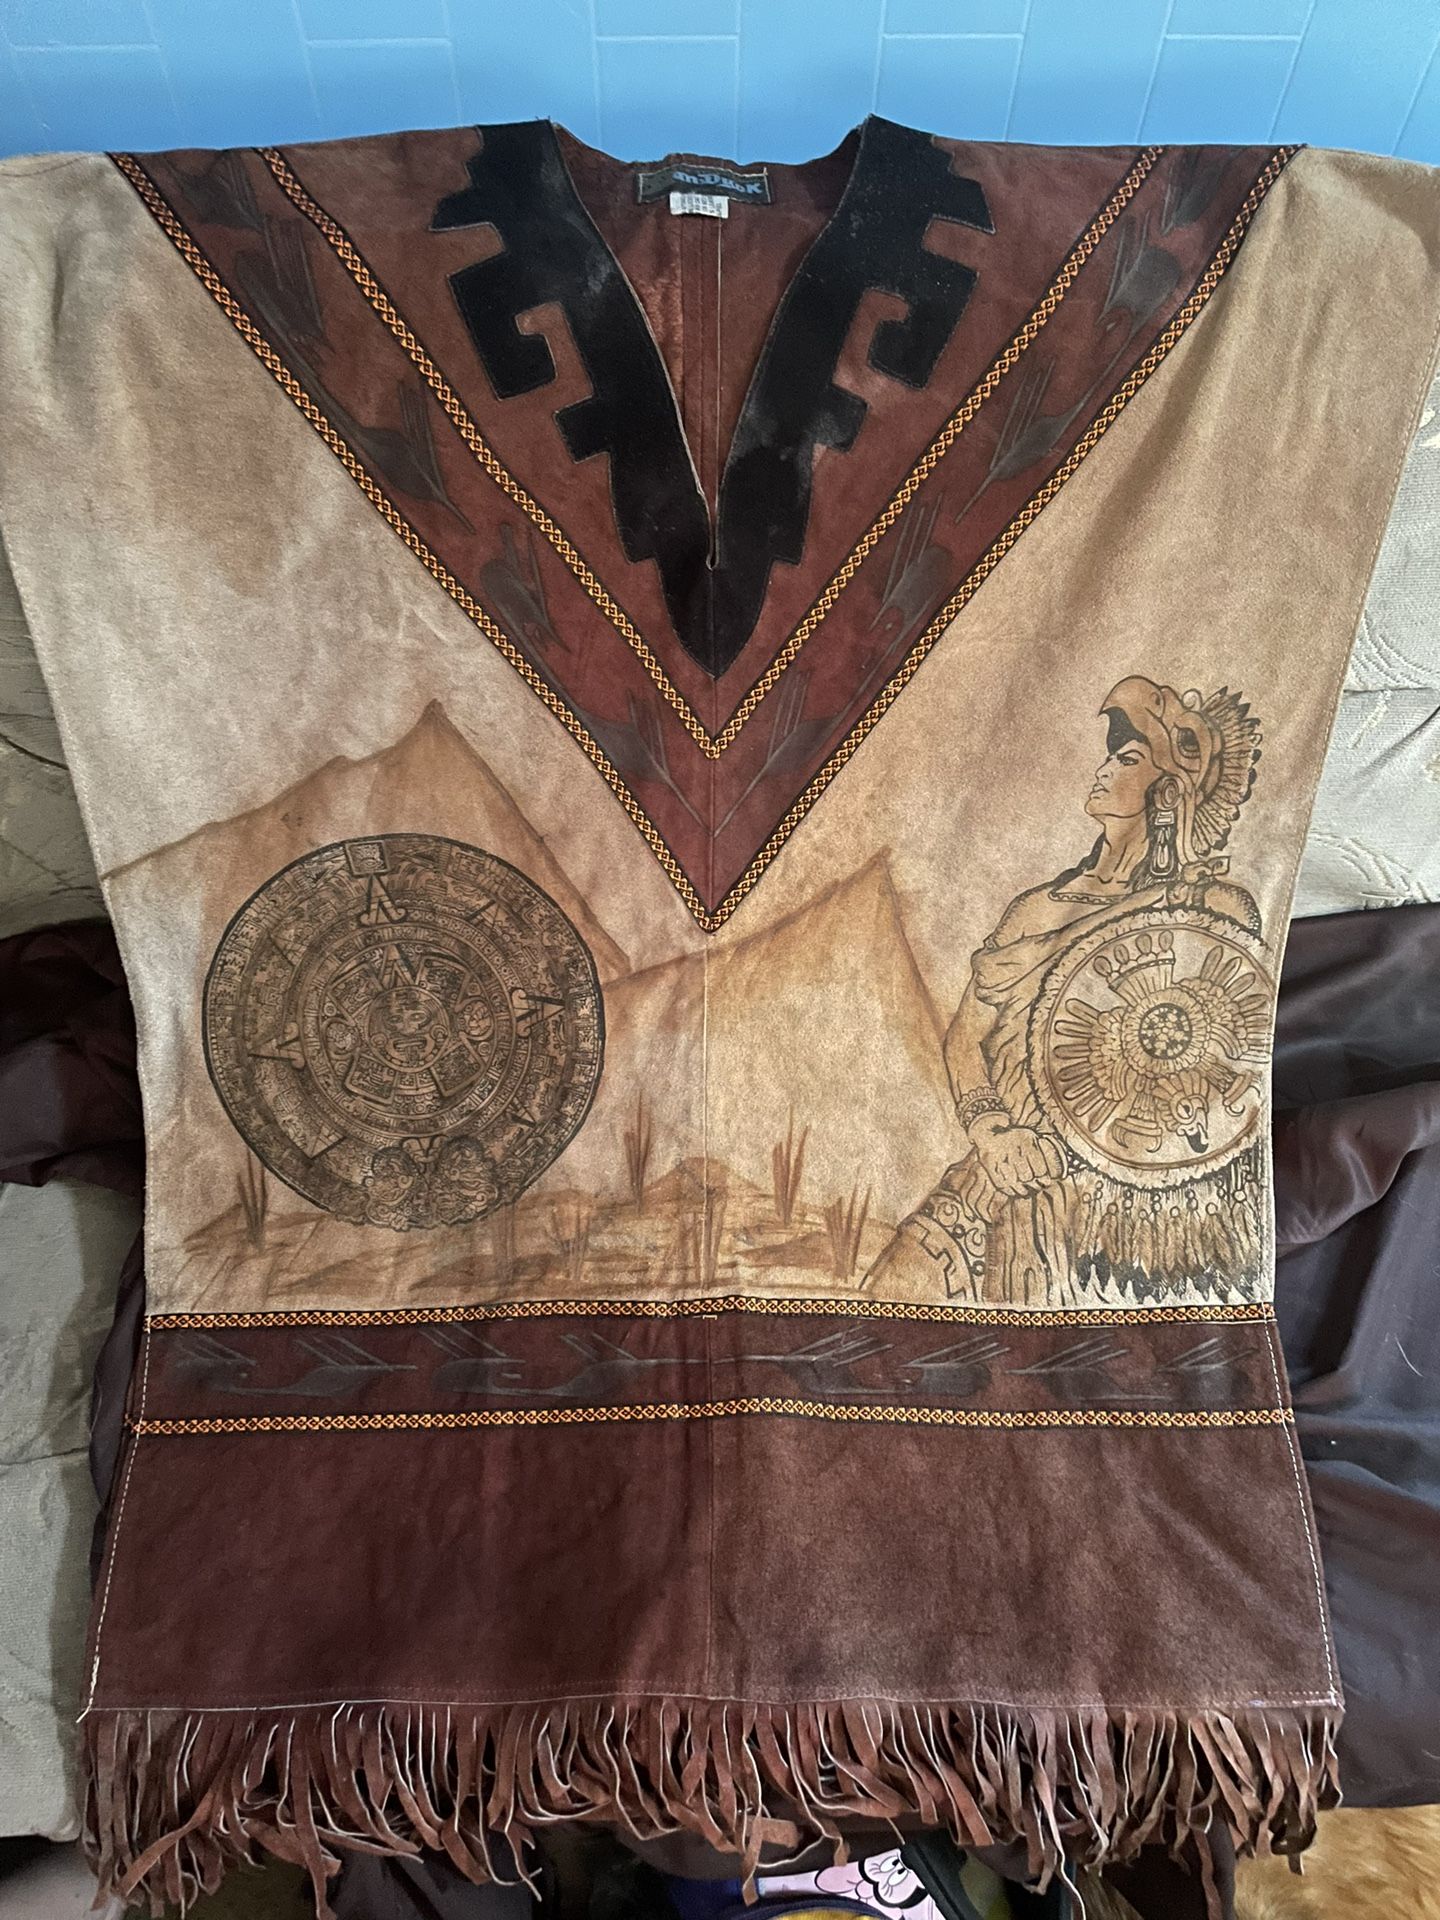 Vintage Leather Poncho Van Dyck, Brown Painted Leather Poncho with Horses, 27x39", V Neck, Eye-Catching, Stylish, Outdoor, Fashionable,